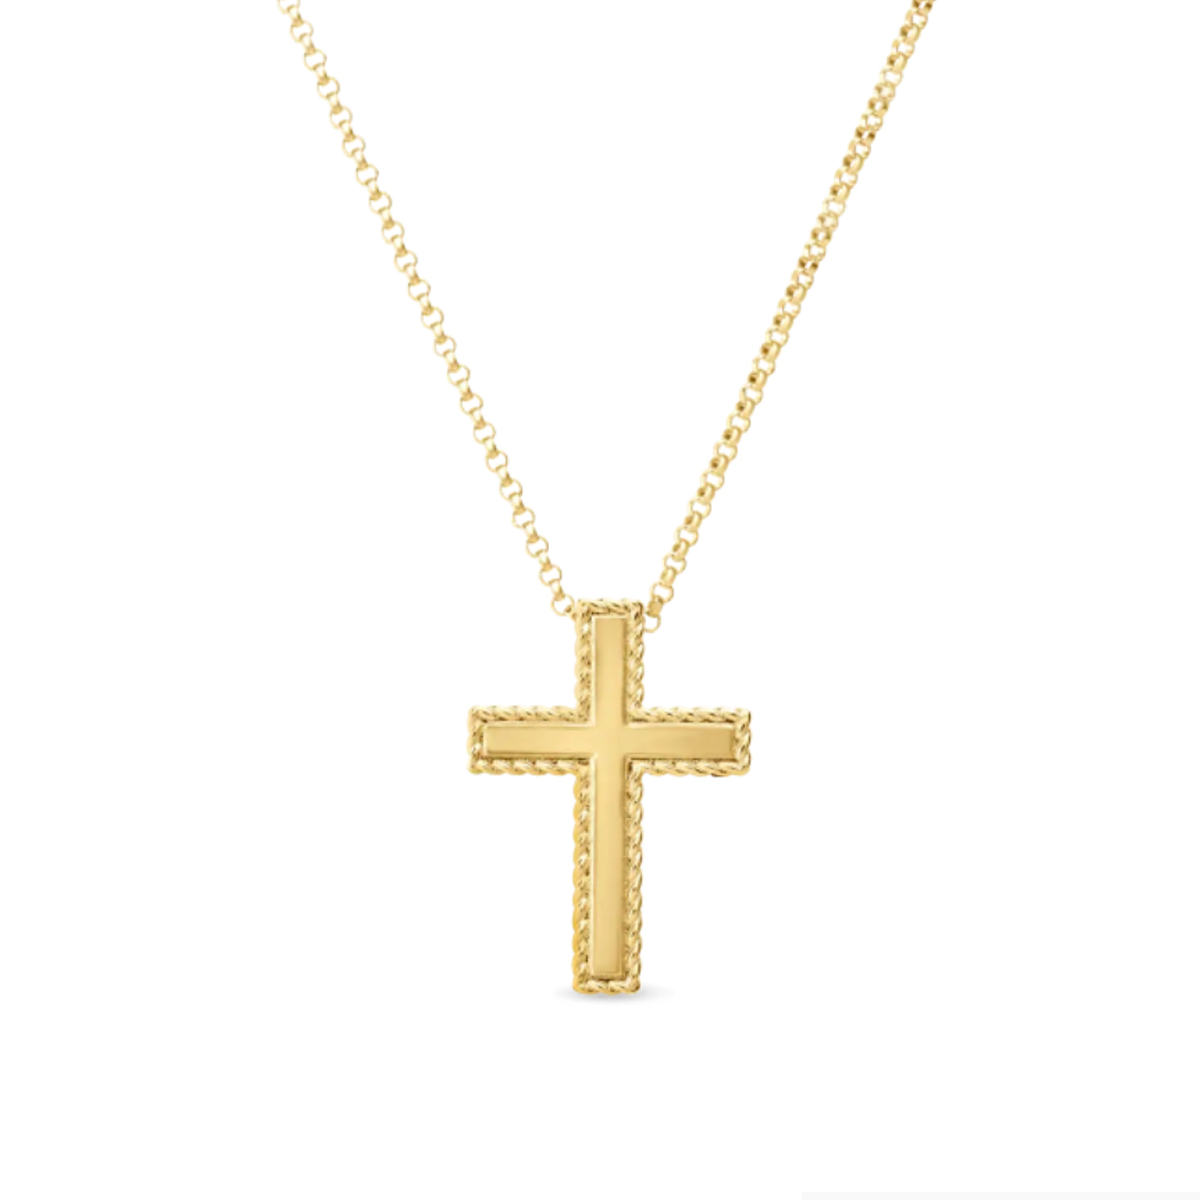 18K Yellow Gold Cross Pendant with Chain